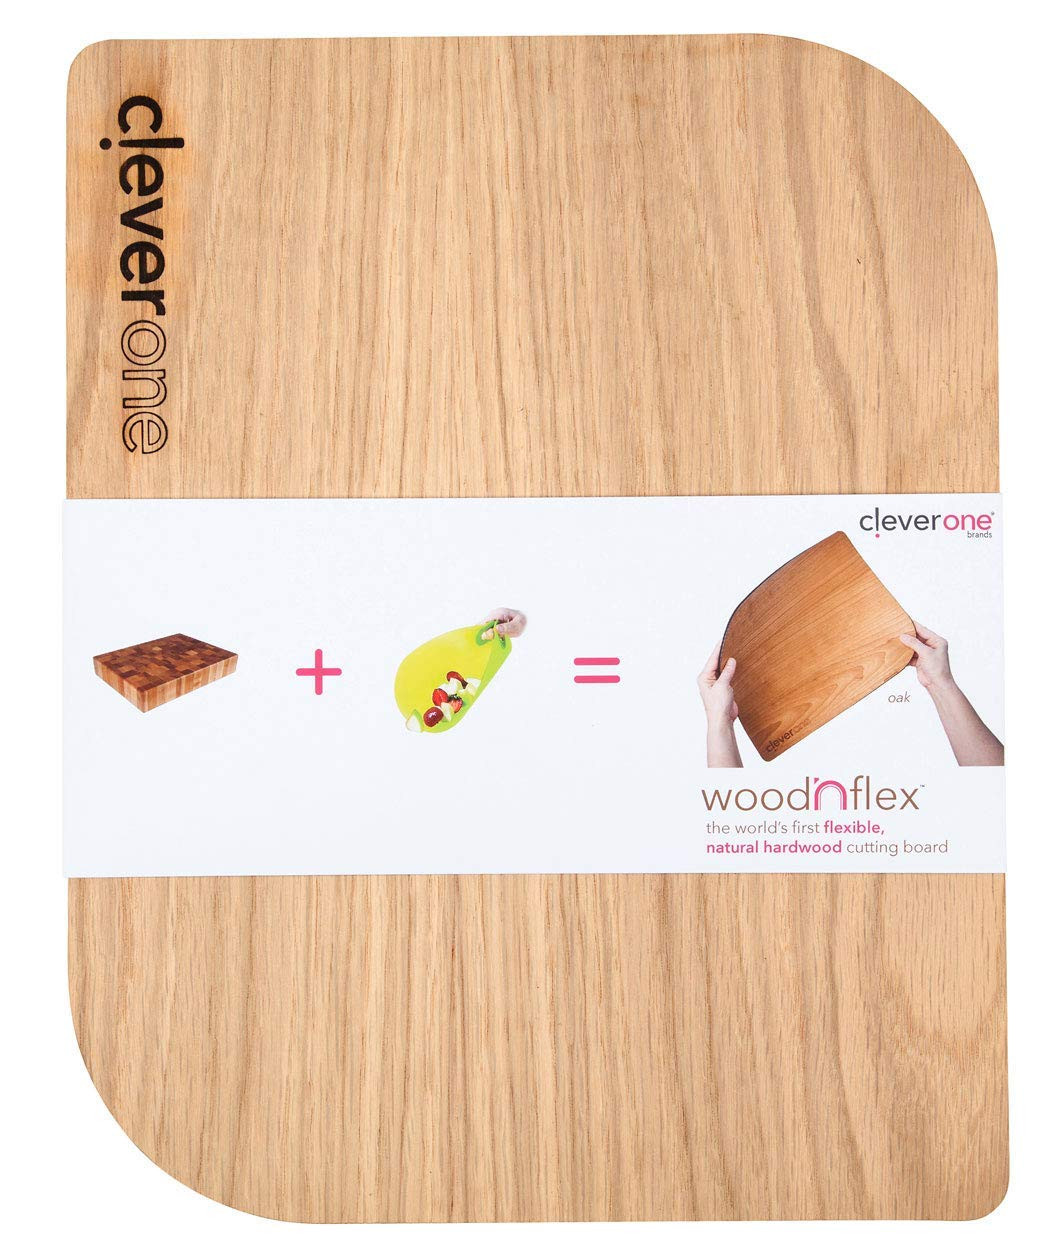 15 Great Jm Hardwood Floors 2024 free download jm hardwood floors of amazon com woodnflex flexible natural wood cutting board for with regard to amazon com woodnflex flexible natural wood cutting board for kitchen usa handmade of oak and